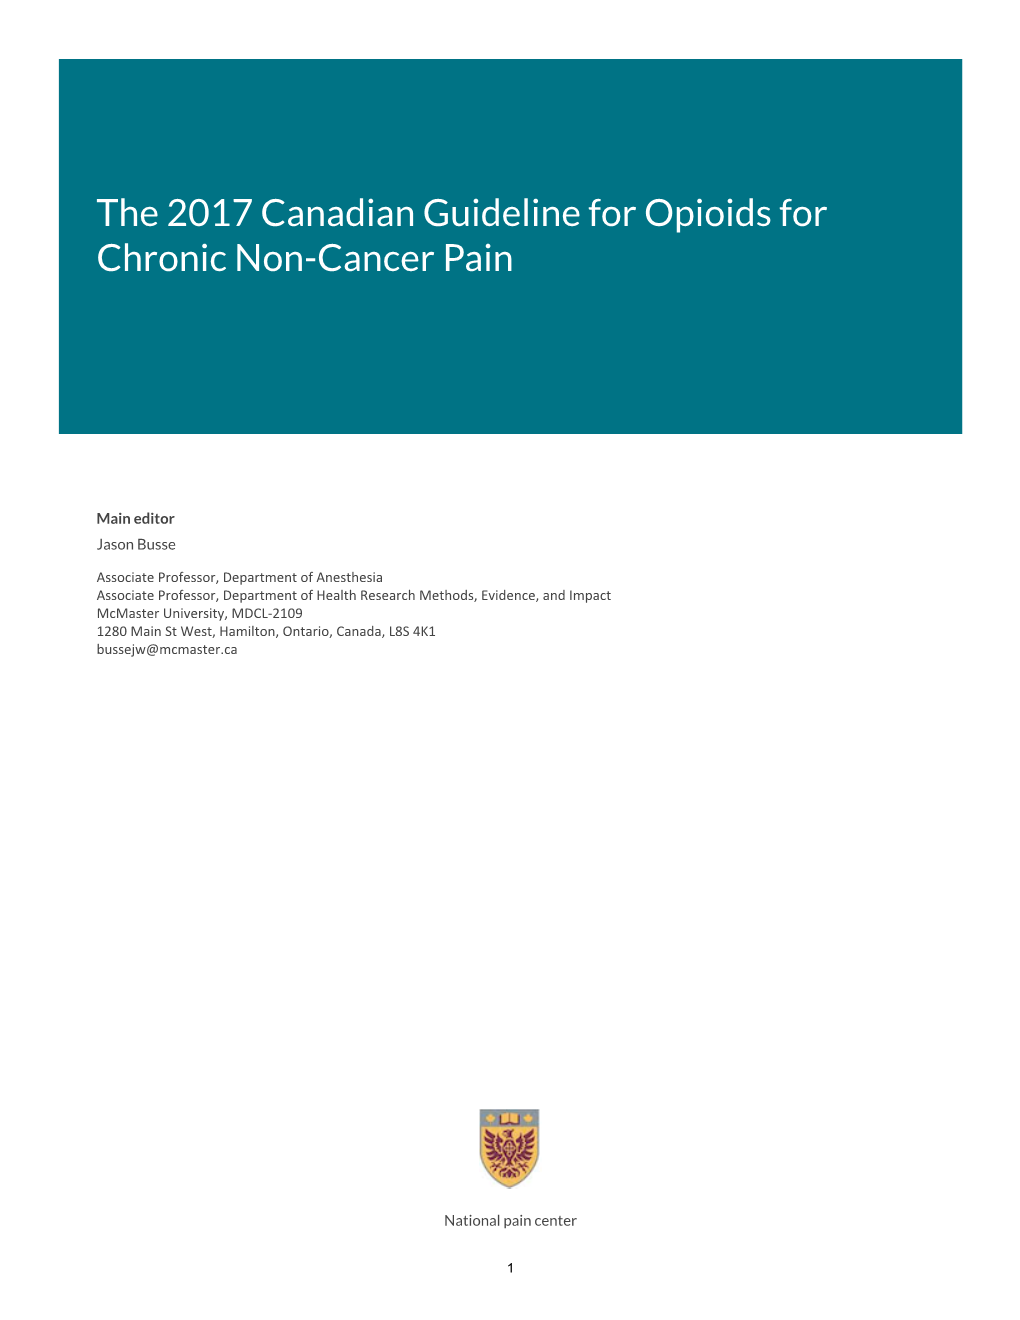 Canadian Guideline for Opioids for Chronic Non-Cancer Pain